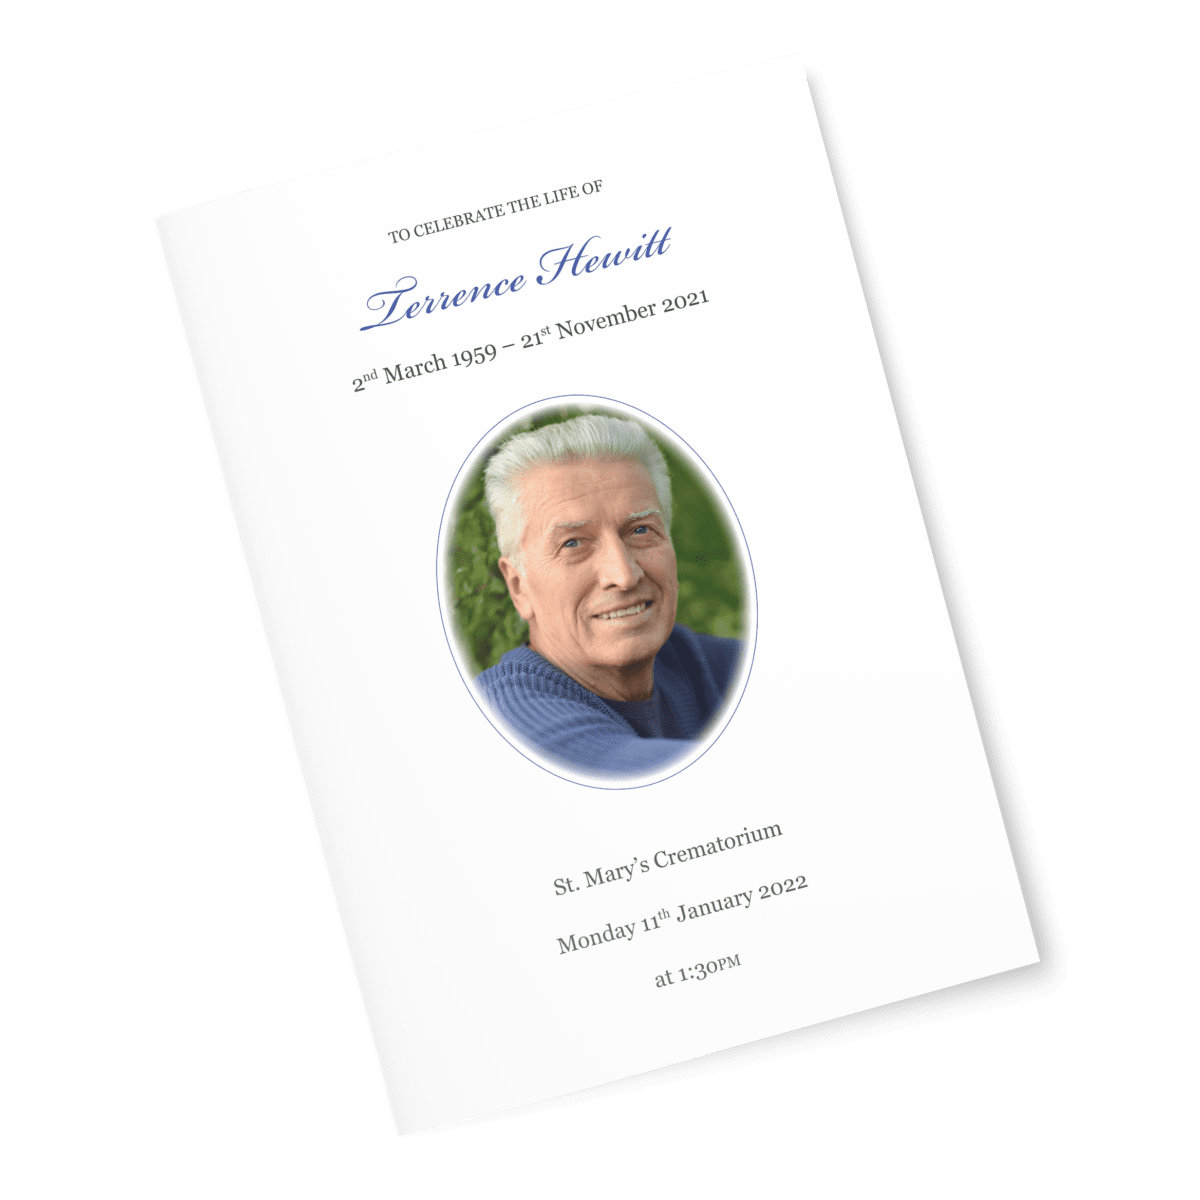 Funeral Order Of Service Printed From Your PDF File printbooklets